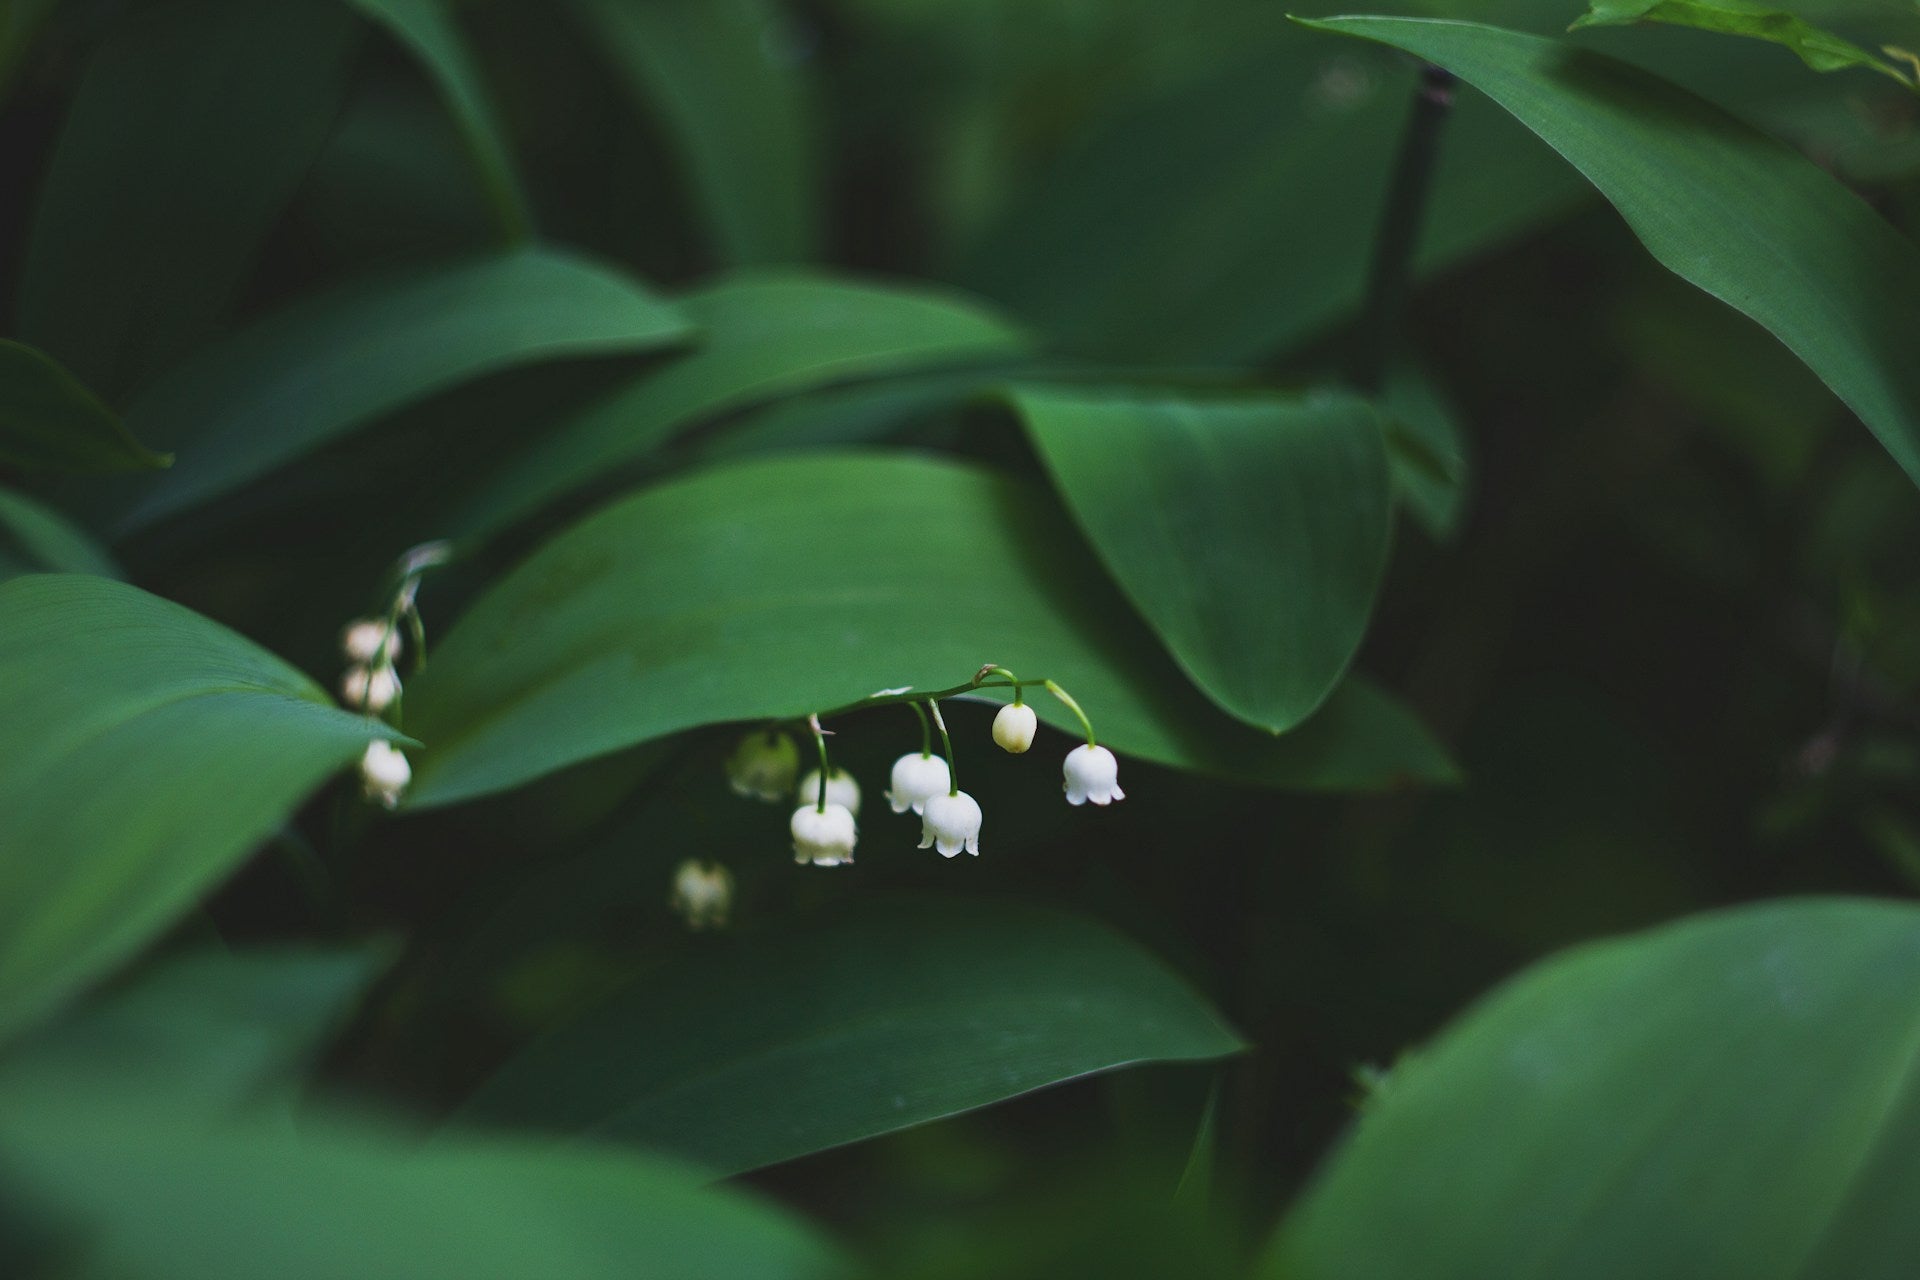 White flowers against large green leaves.